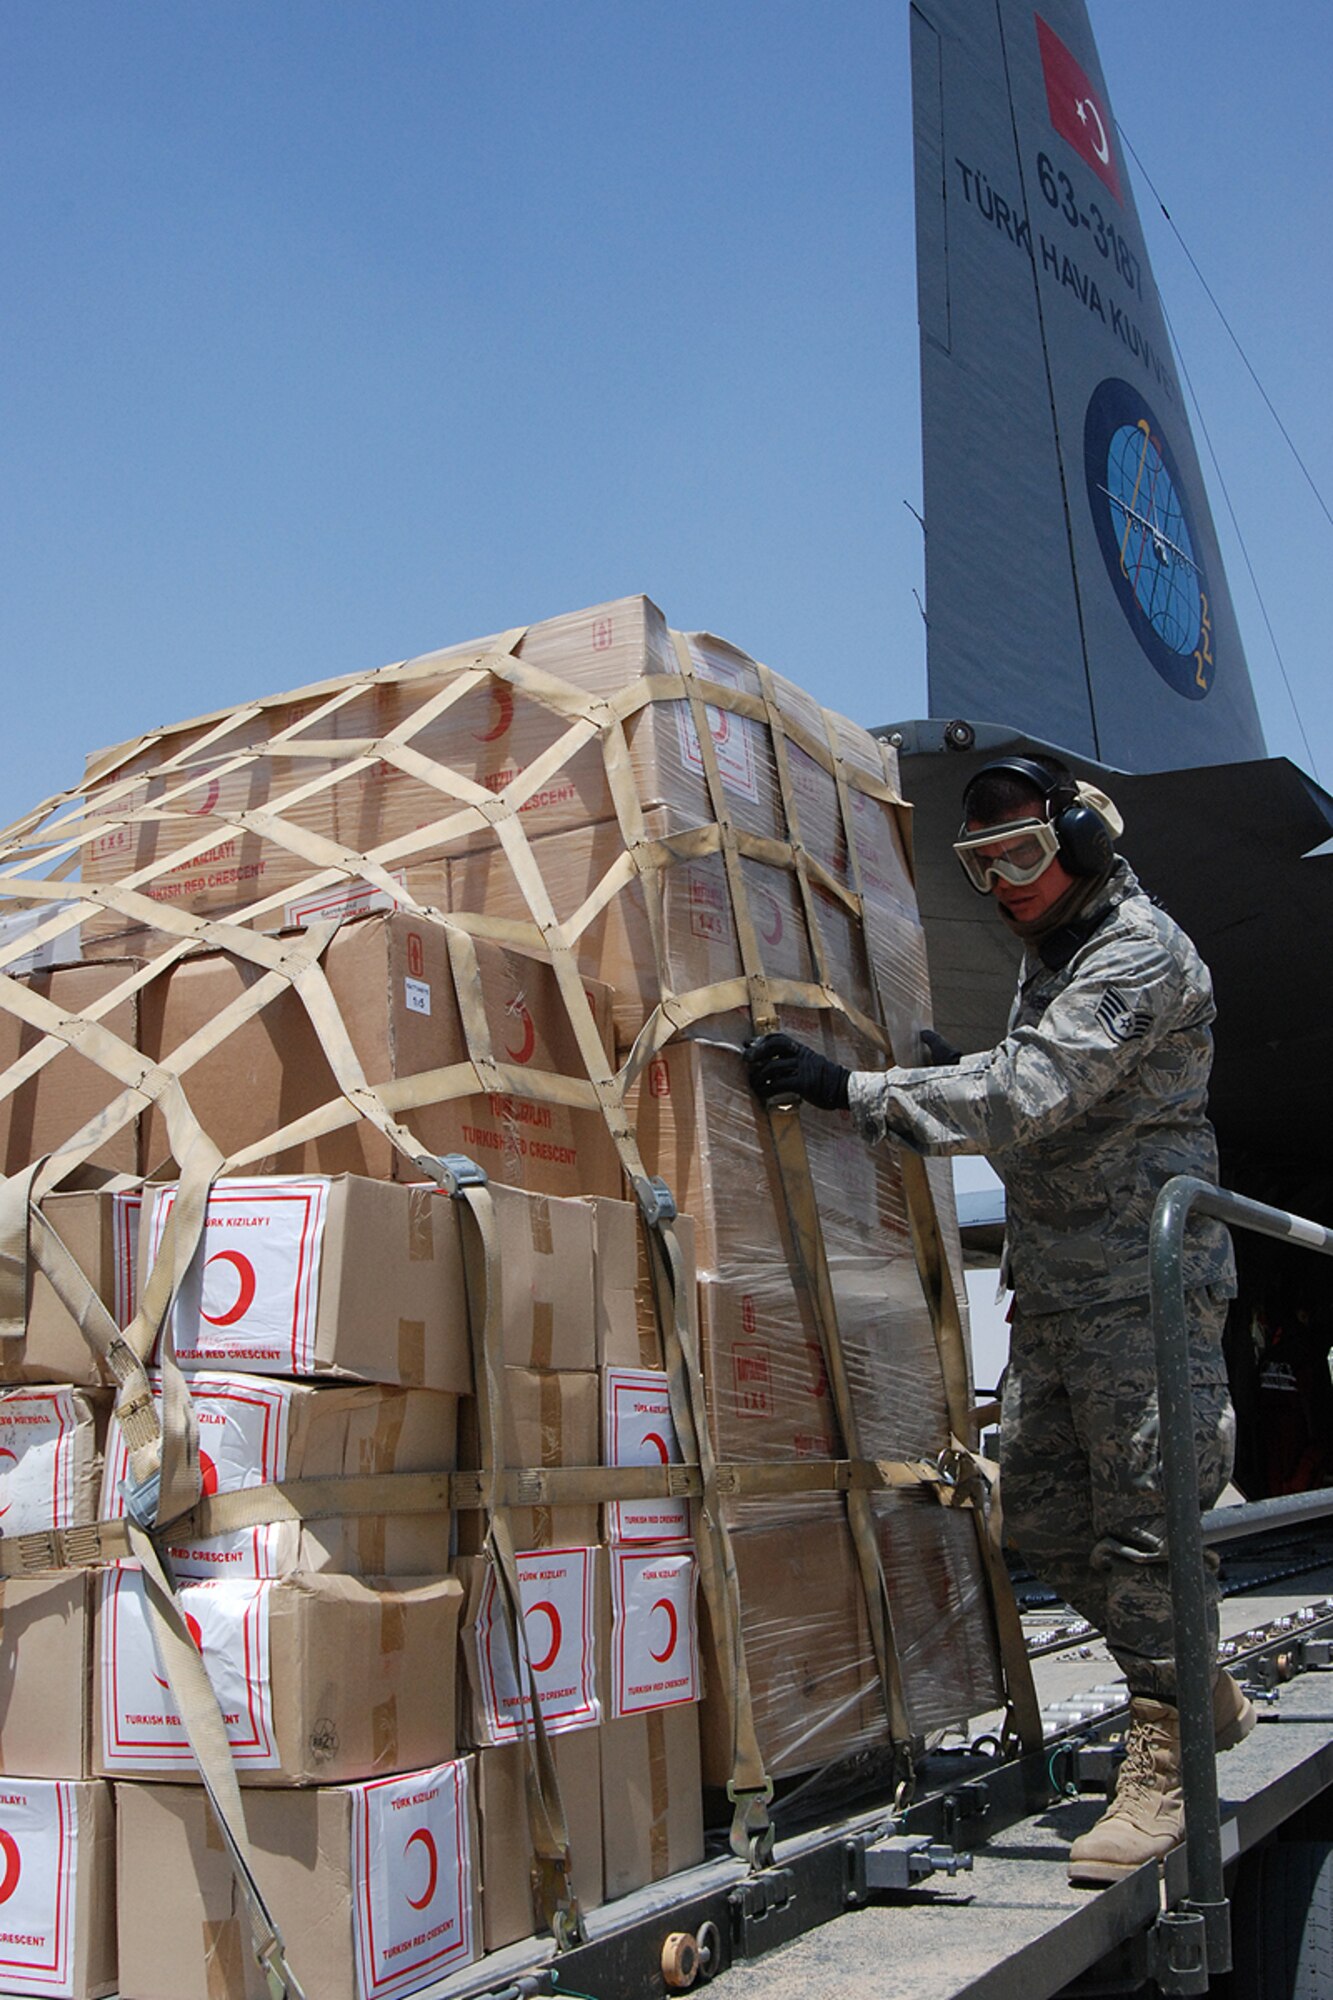 KIRKUK REGIONAL AIR BASE, Iraq – Staff Sgt. Jesus Aguilar, 506th Expeditionary Logistics Squadron Aerial Port Squadron ramp commander, pushes one of five cargo pallets loaded with relief supplies on to a 60K loader from a Turkish C-130 here June 22. Sergeant Aguilar was one of almost 20 ELRS Airmen involved in the download of 12 tons of supplies including 90 blankets, 400 tents, kitchen equipment, food and more. ELRS aerial porters also helped reconfigure the airplane to carry the 11 patients, who were victims of a June 20 suicide truck bombing in Taza District south of Kirkuk city. More than 80 people were killed and 250 injured in the blast. Sergeant Aguilar is a native of Riverside, Calif., and is deployed here from the 50th Aerial Port Squadron, March Air Reserve Base, Calif. (U.S. Air Force photo / Senior Master Sgt. Michael Land)